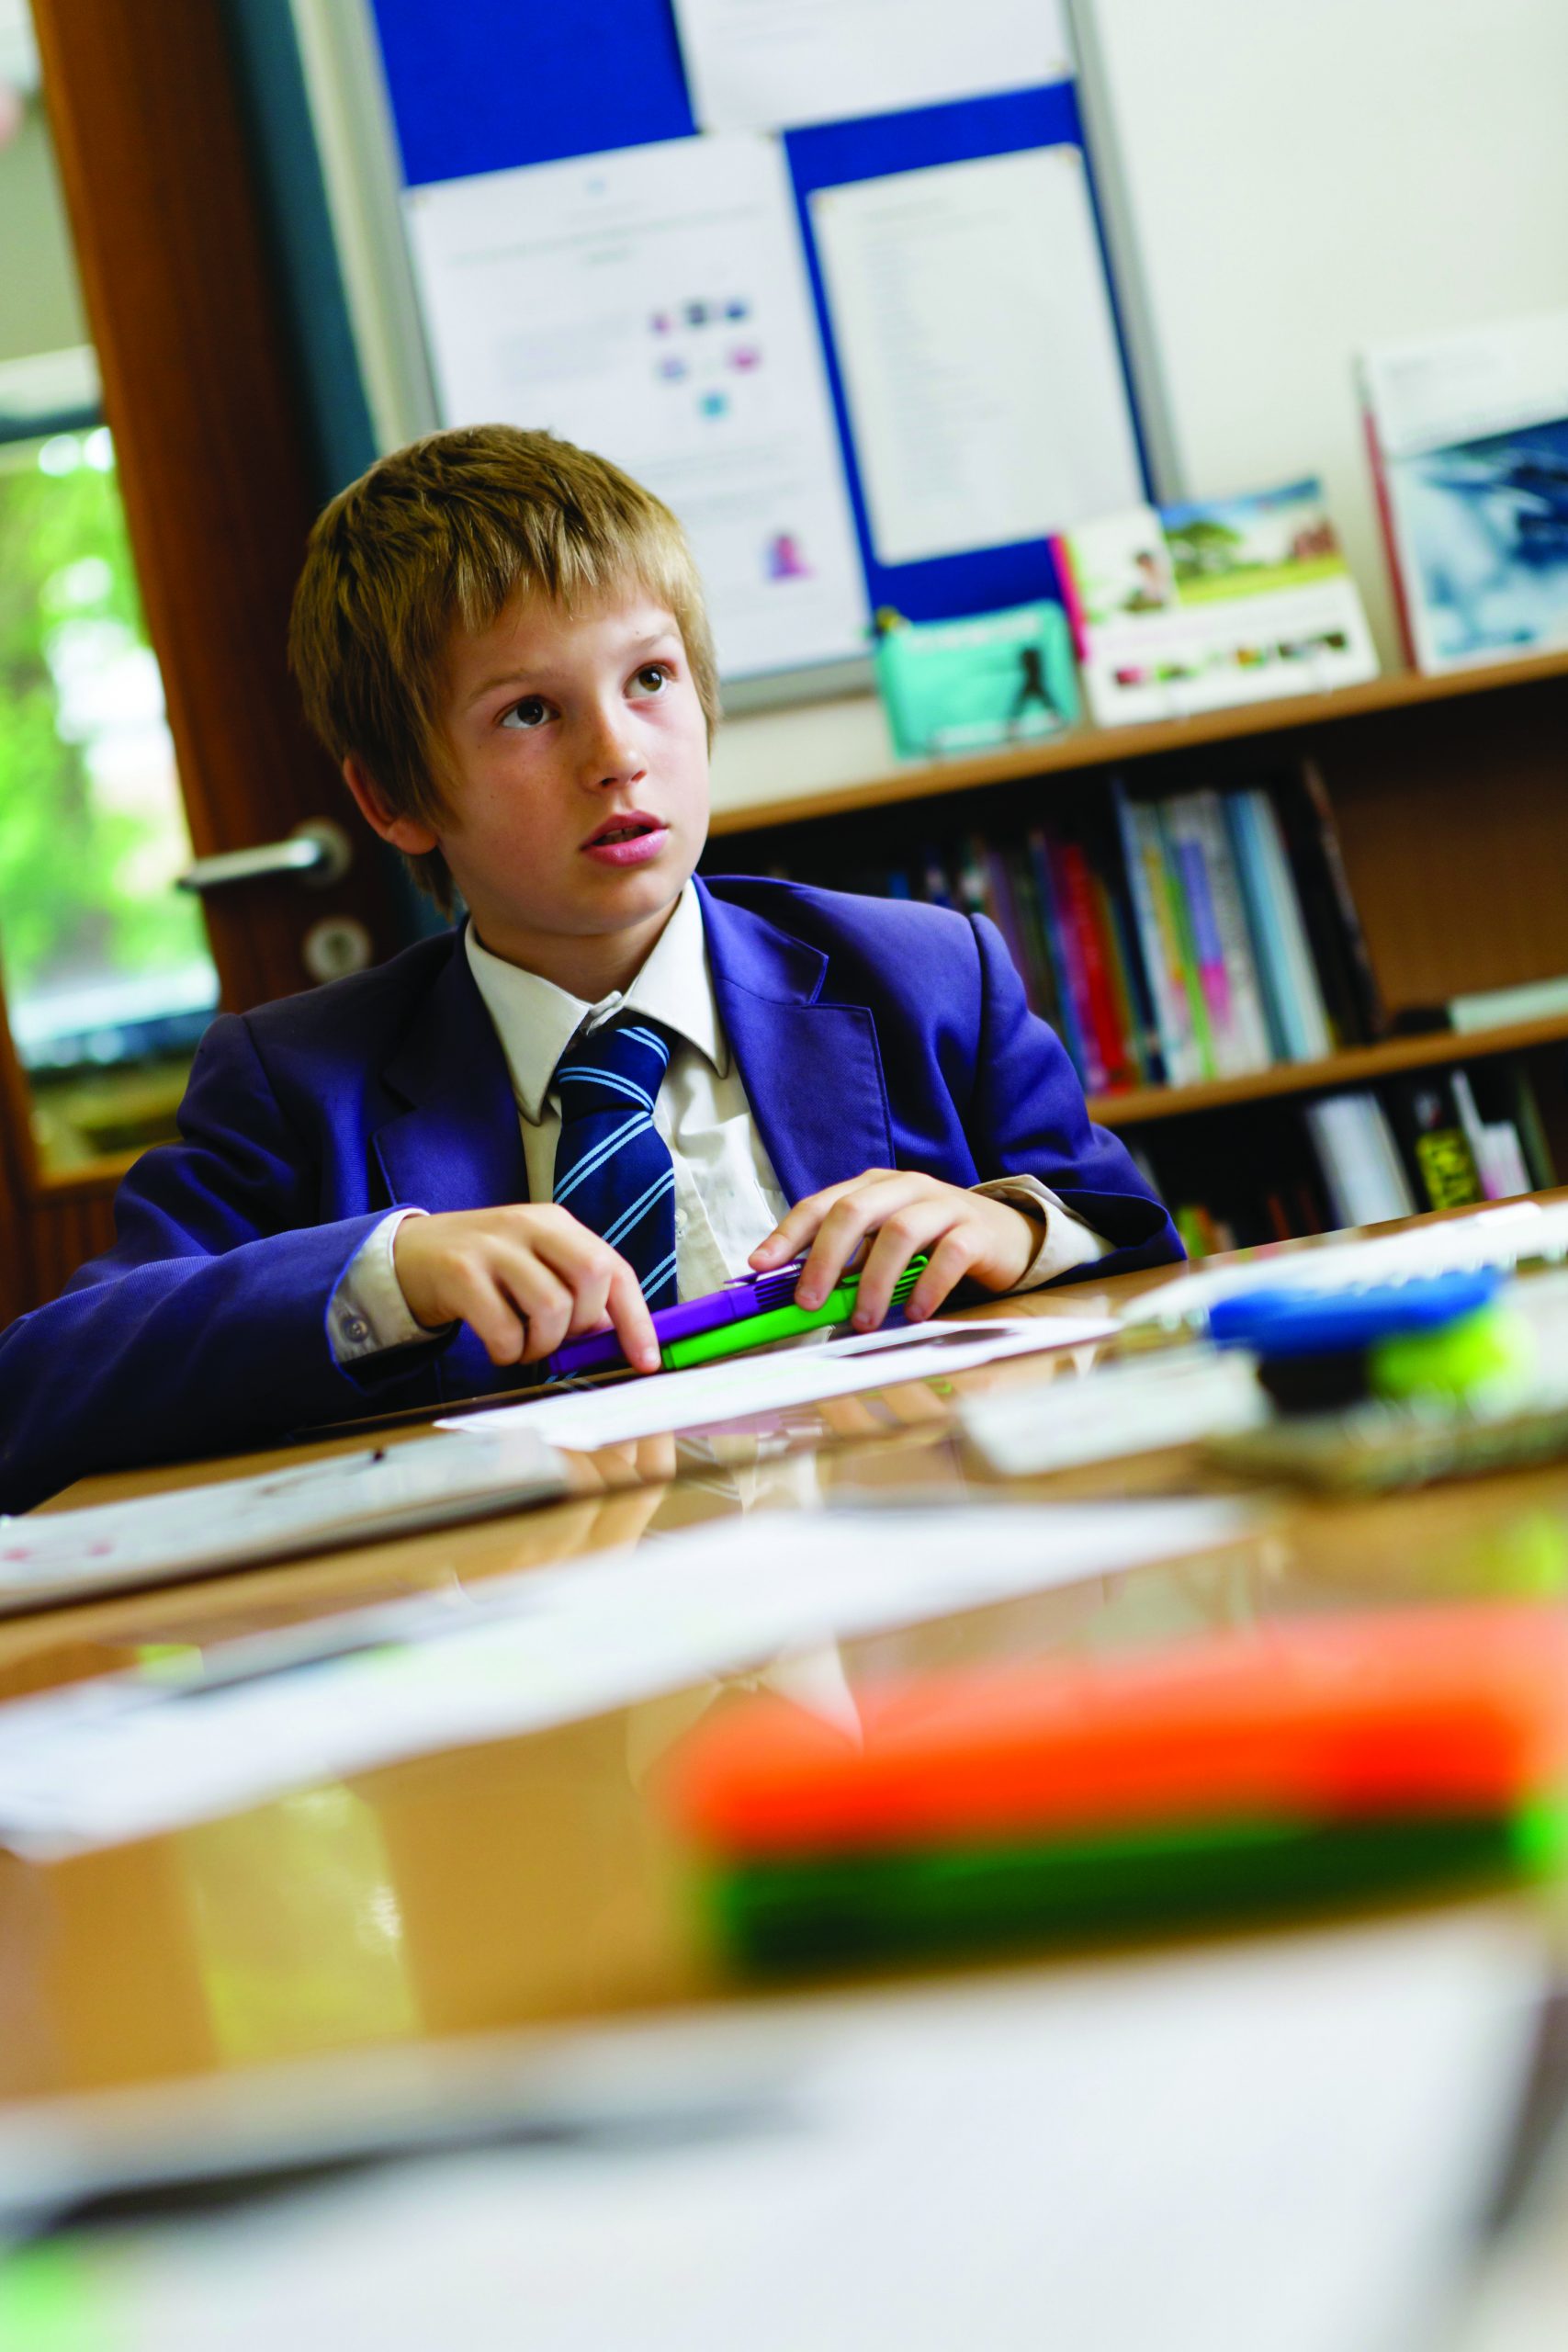 A boy sitting at a desk with stationery on the table